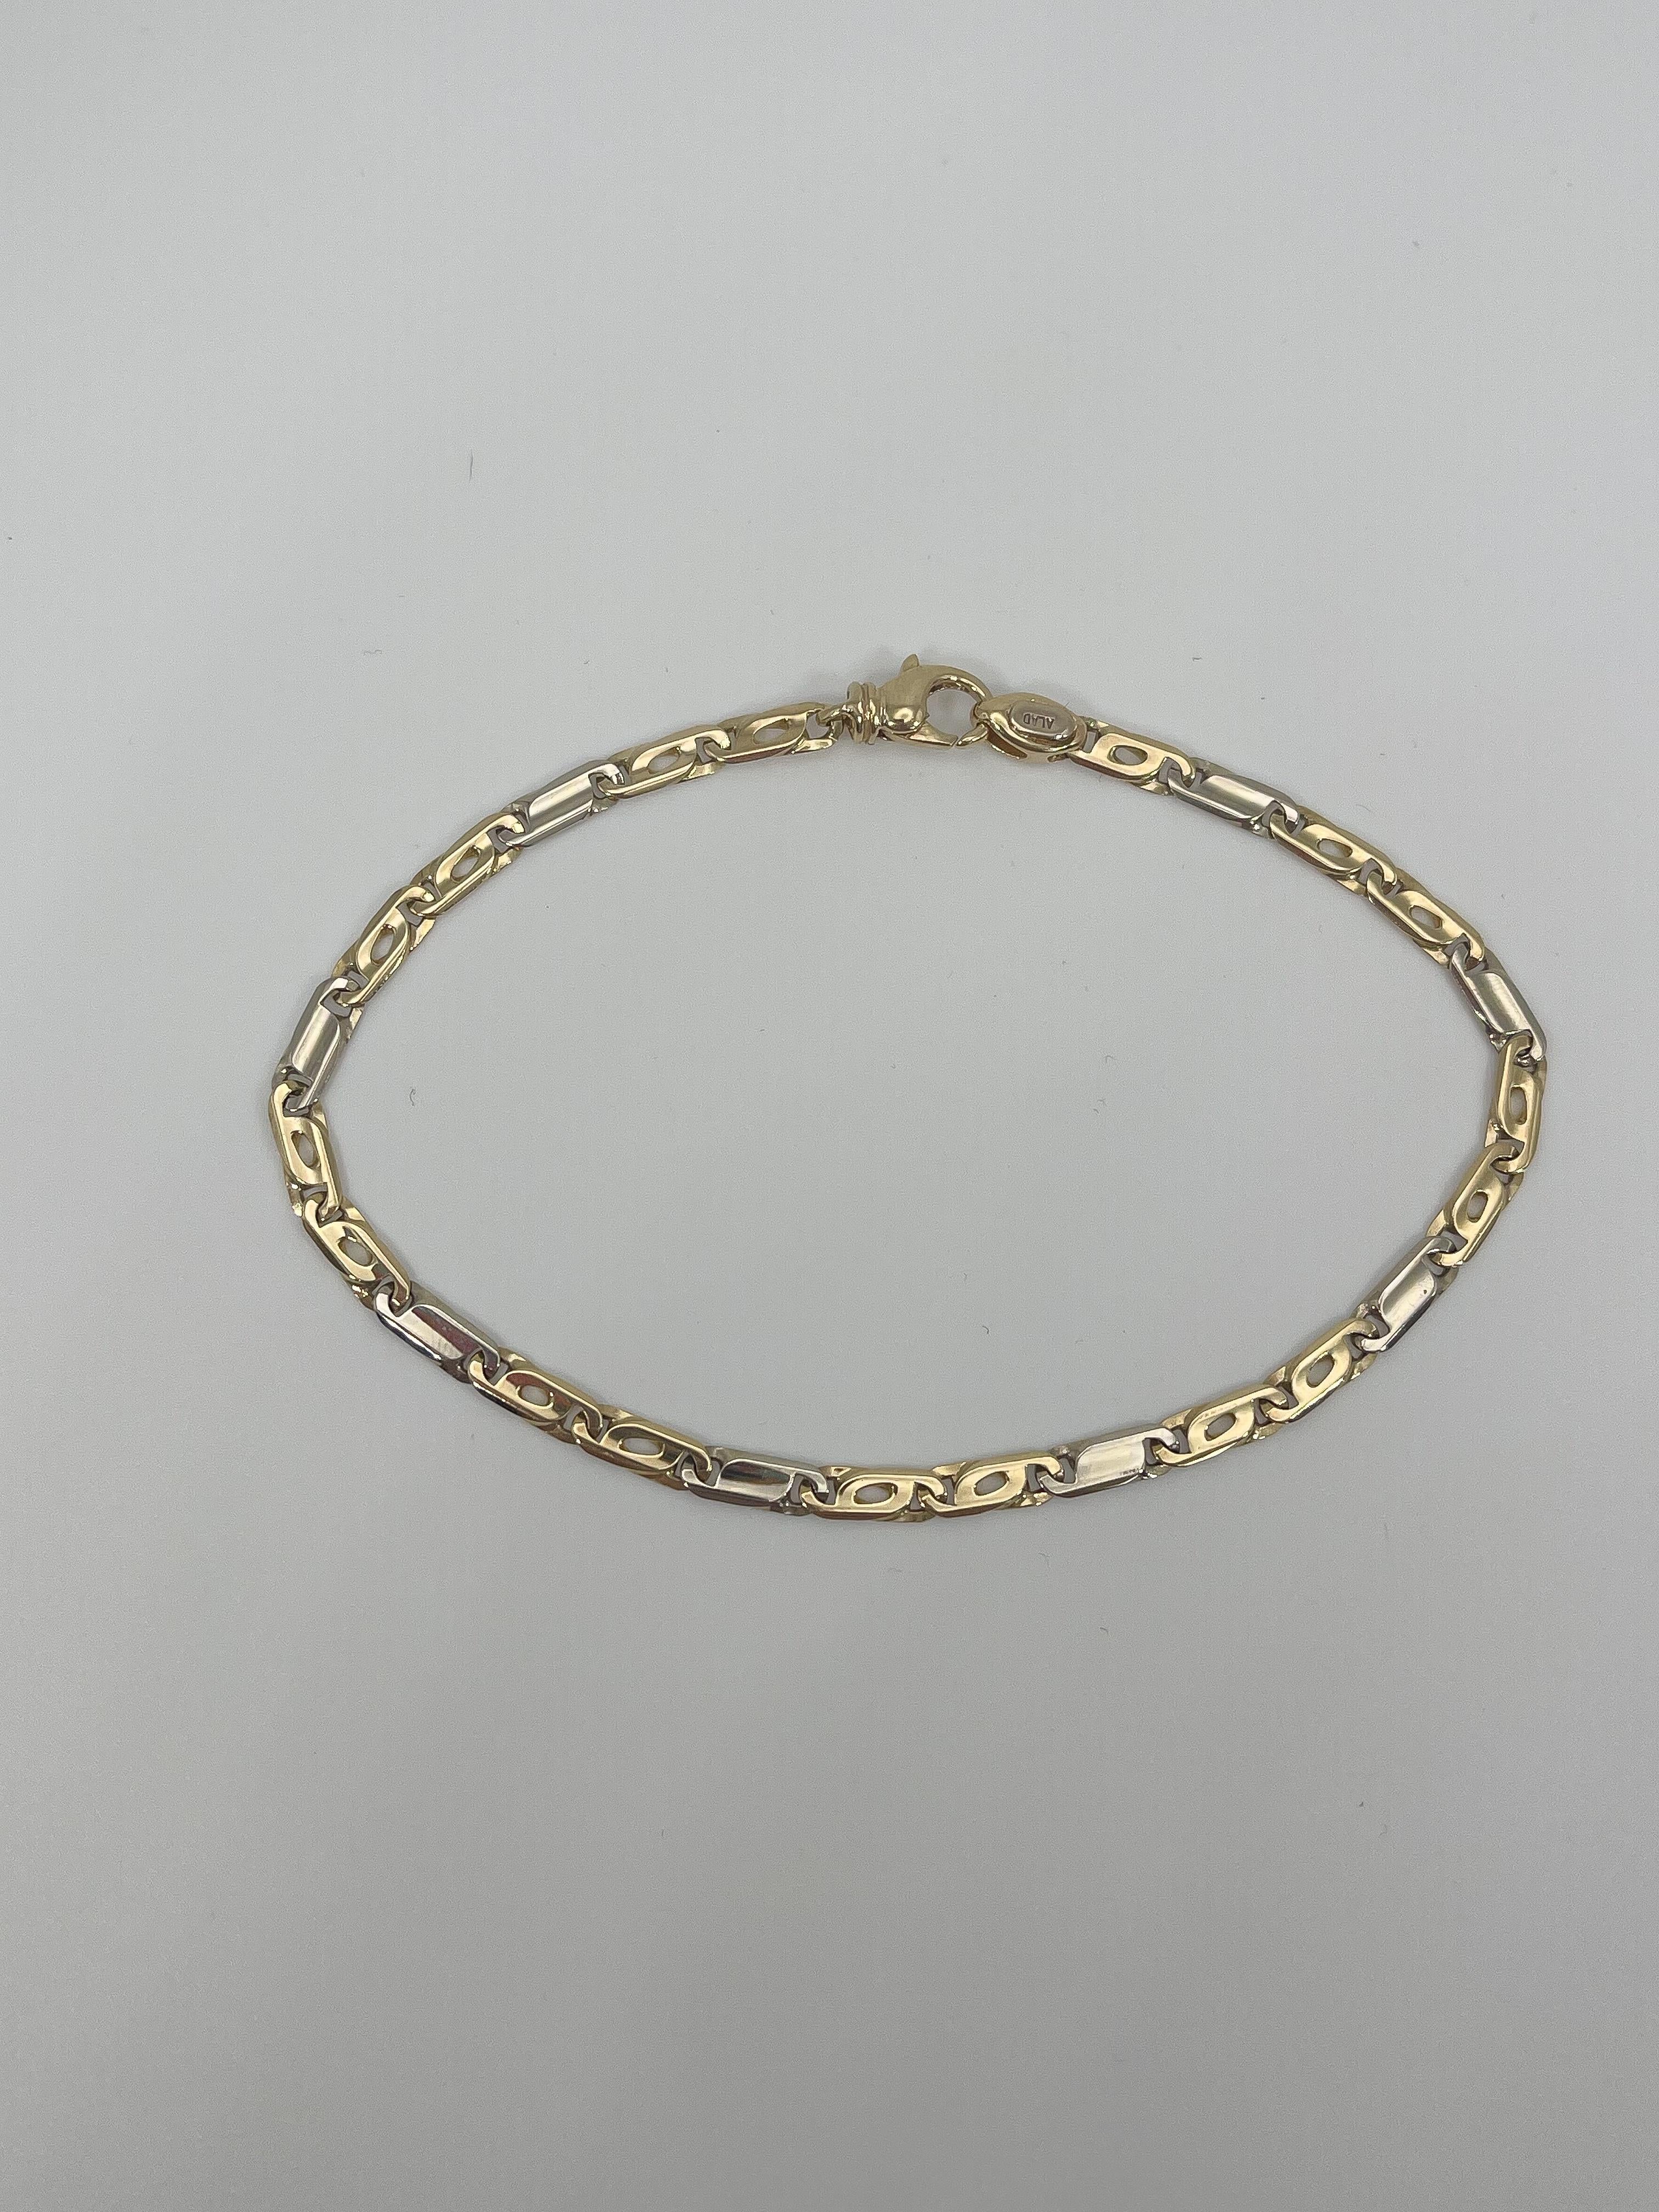 14k two toned men's fancy link bracelet. This bracelet has a length of 8 inches, a width of 3 mm, it has a lobster clasp to open and close, and it has a total weight of 6.3 grams.